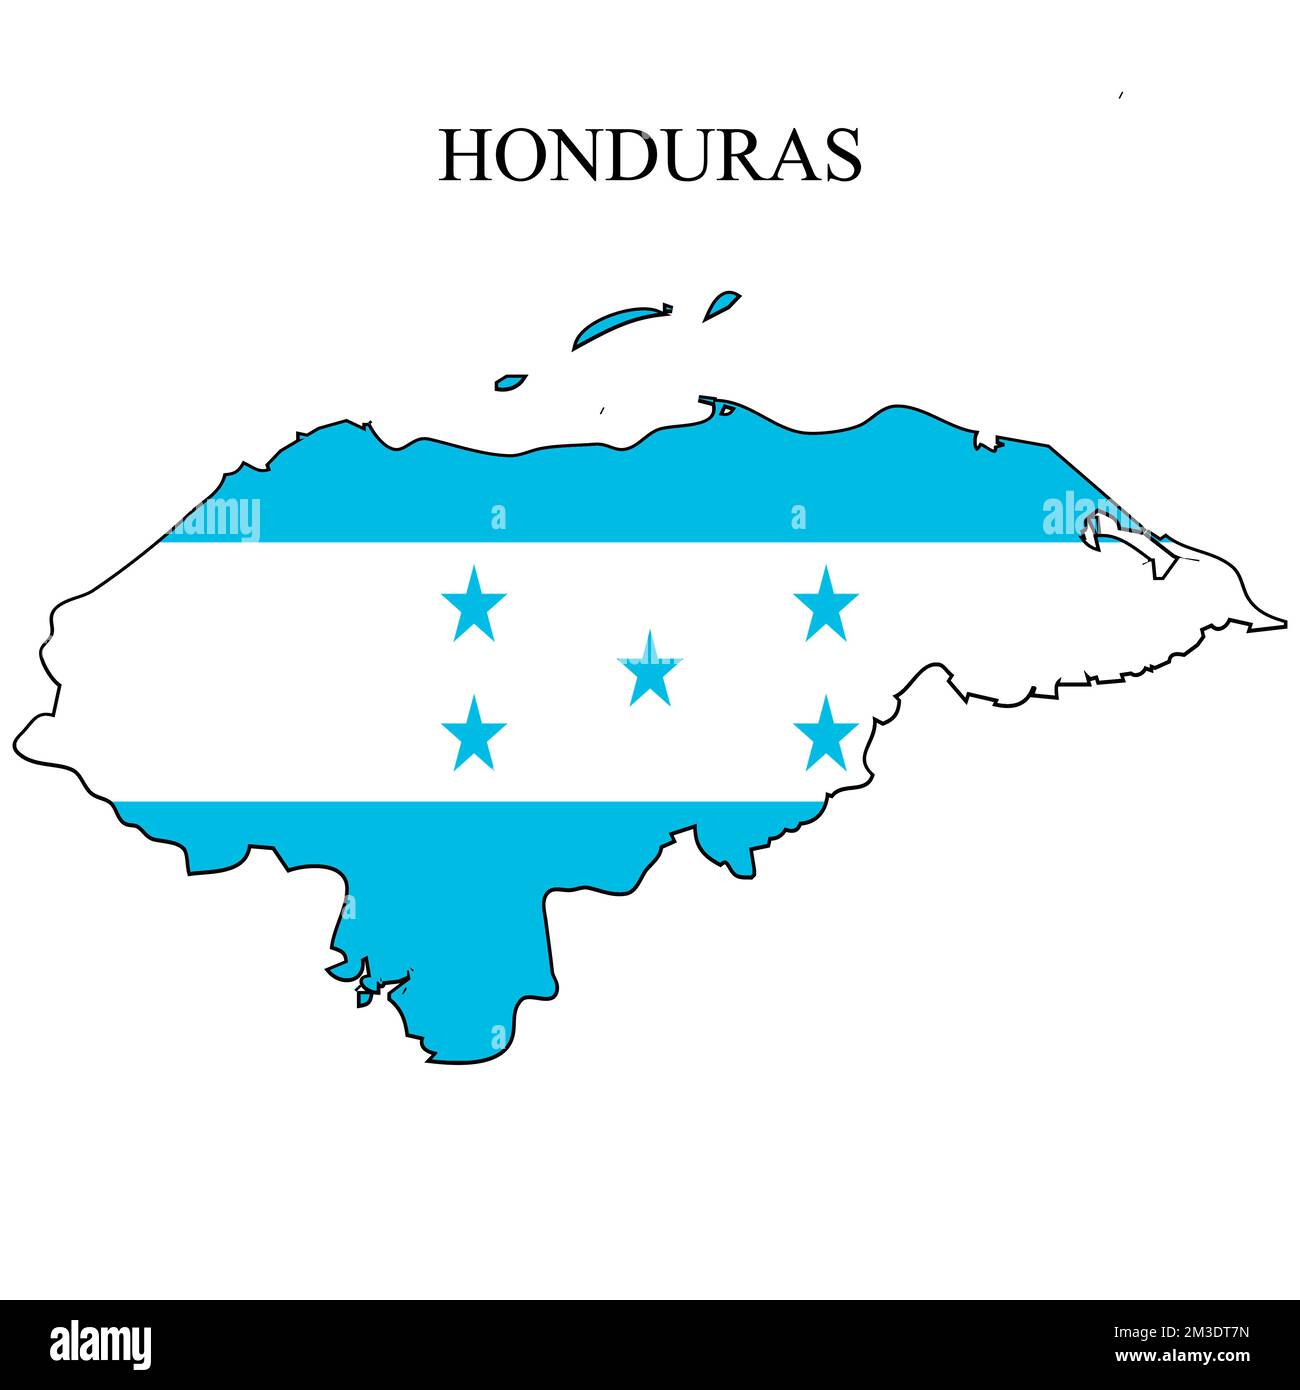 Honduras map vector illustration. Global economy. Famous country. Central America. America. Stock Vector